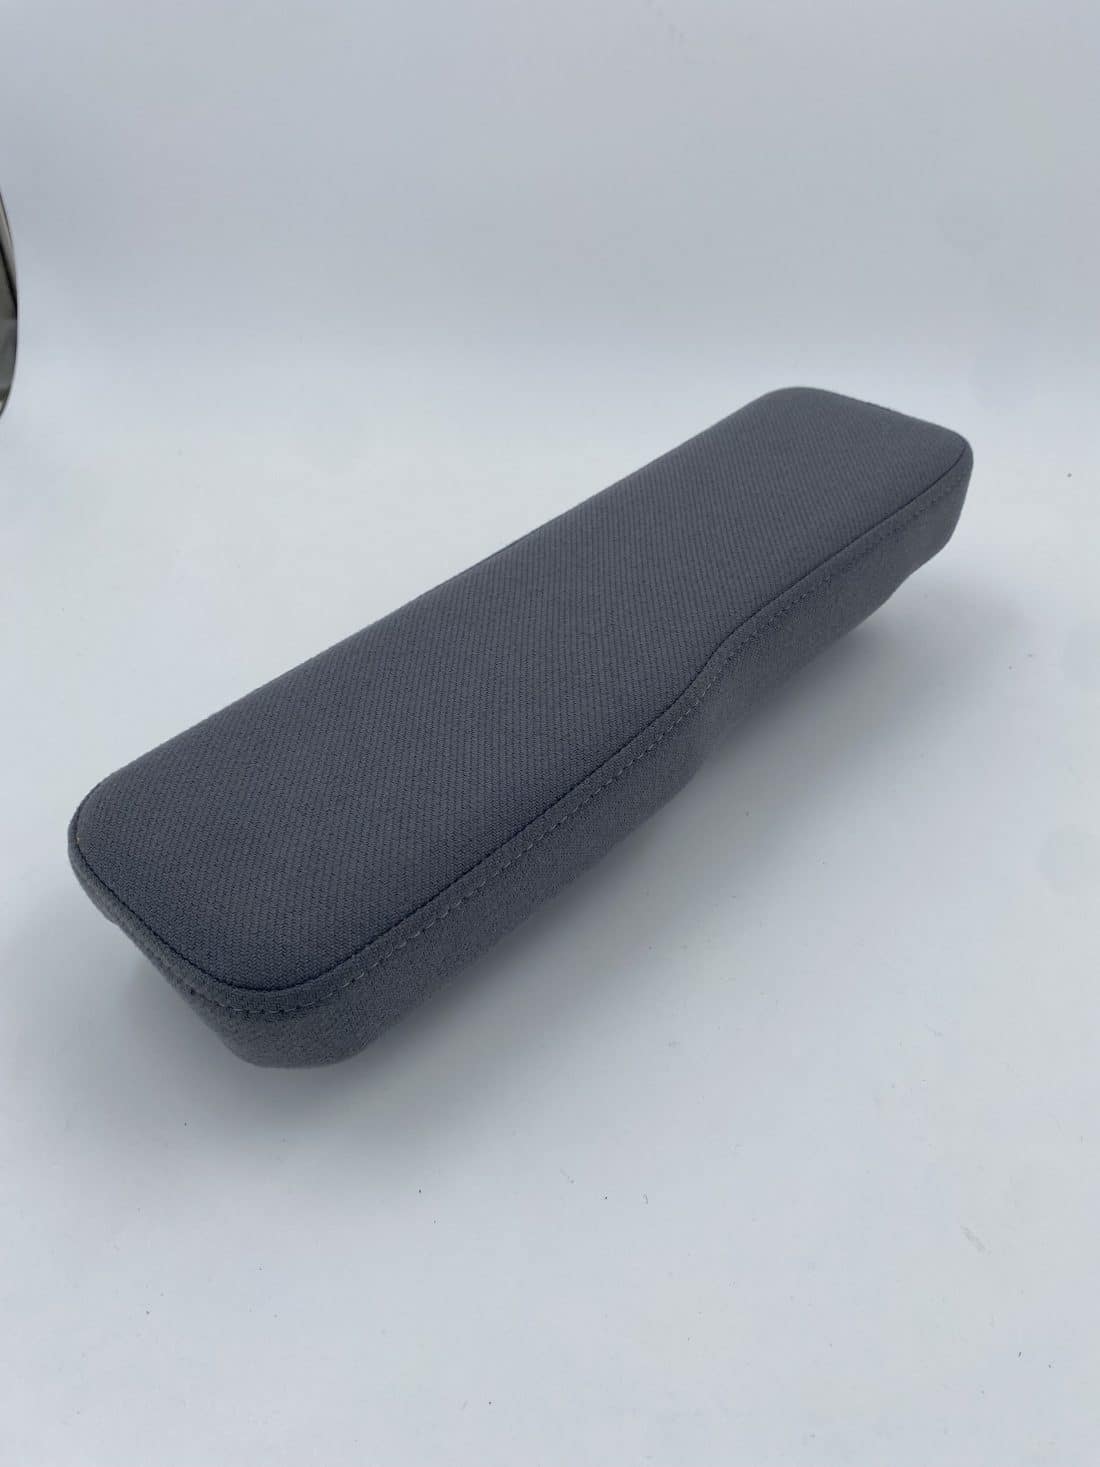 Trp Post Container Data Trp Post Id 13217 Recaro Armrest Fabric Grey Right Trp Post Container